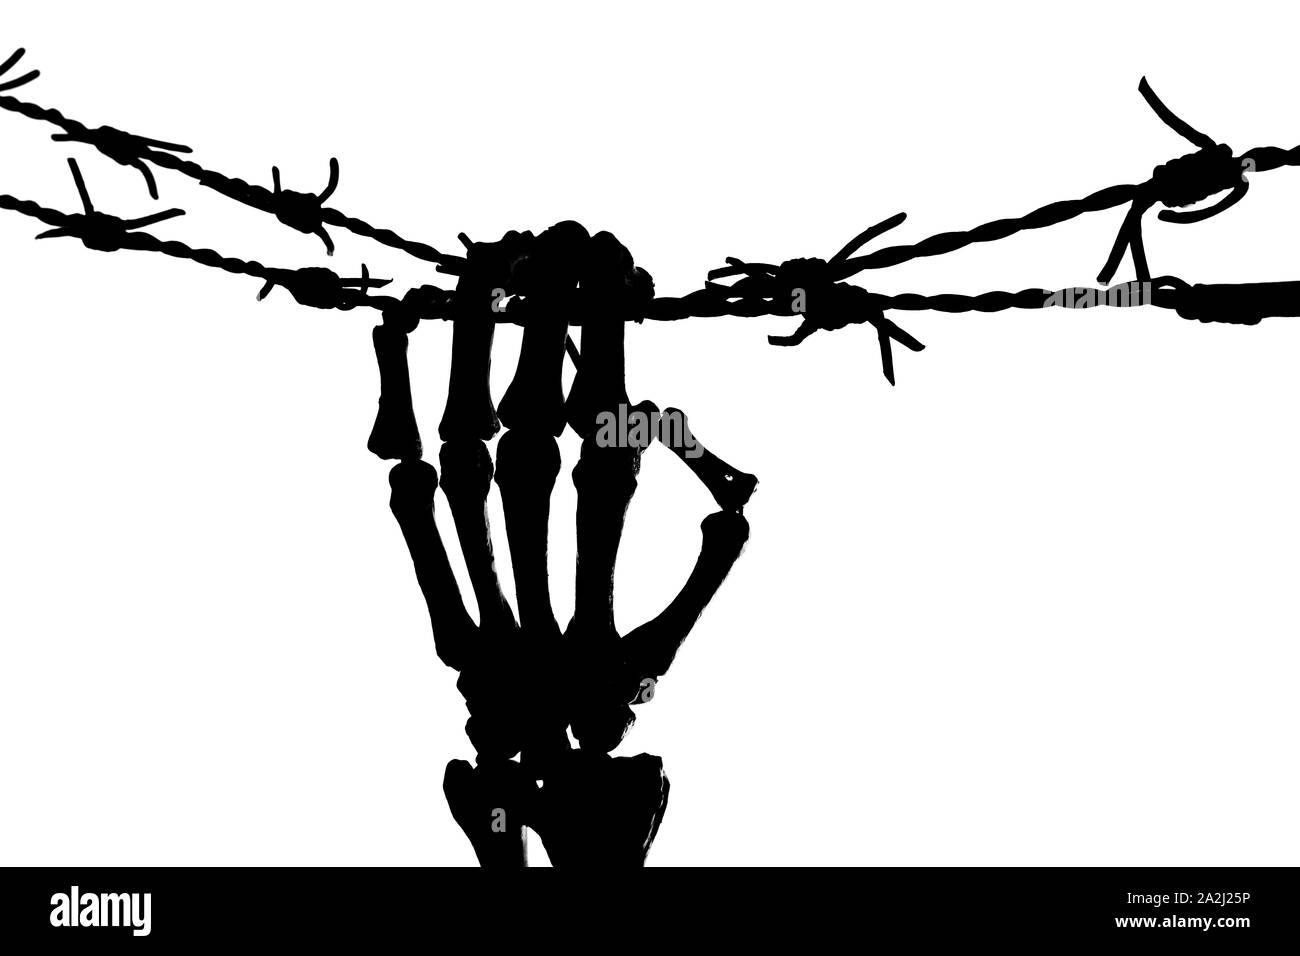 Freedom image with a silhouette of a skeleton hand holding barbed wire Stock Photo